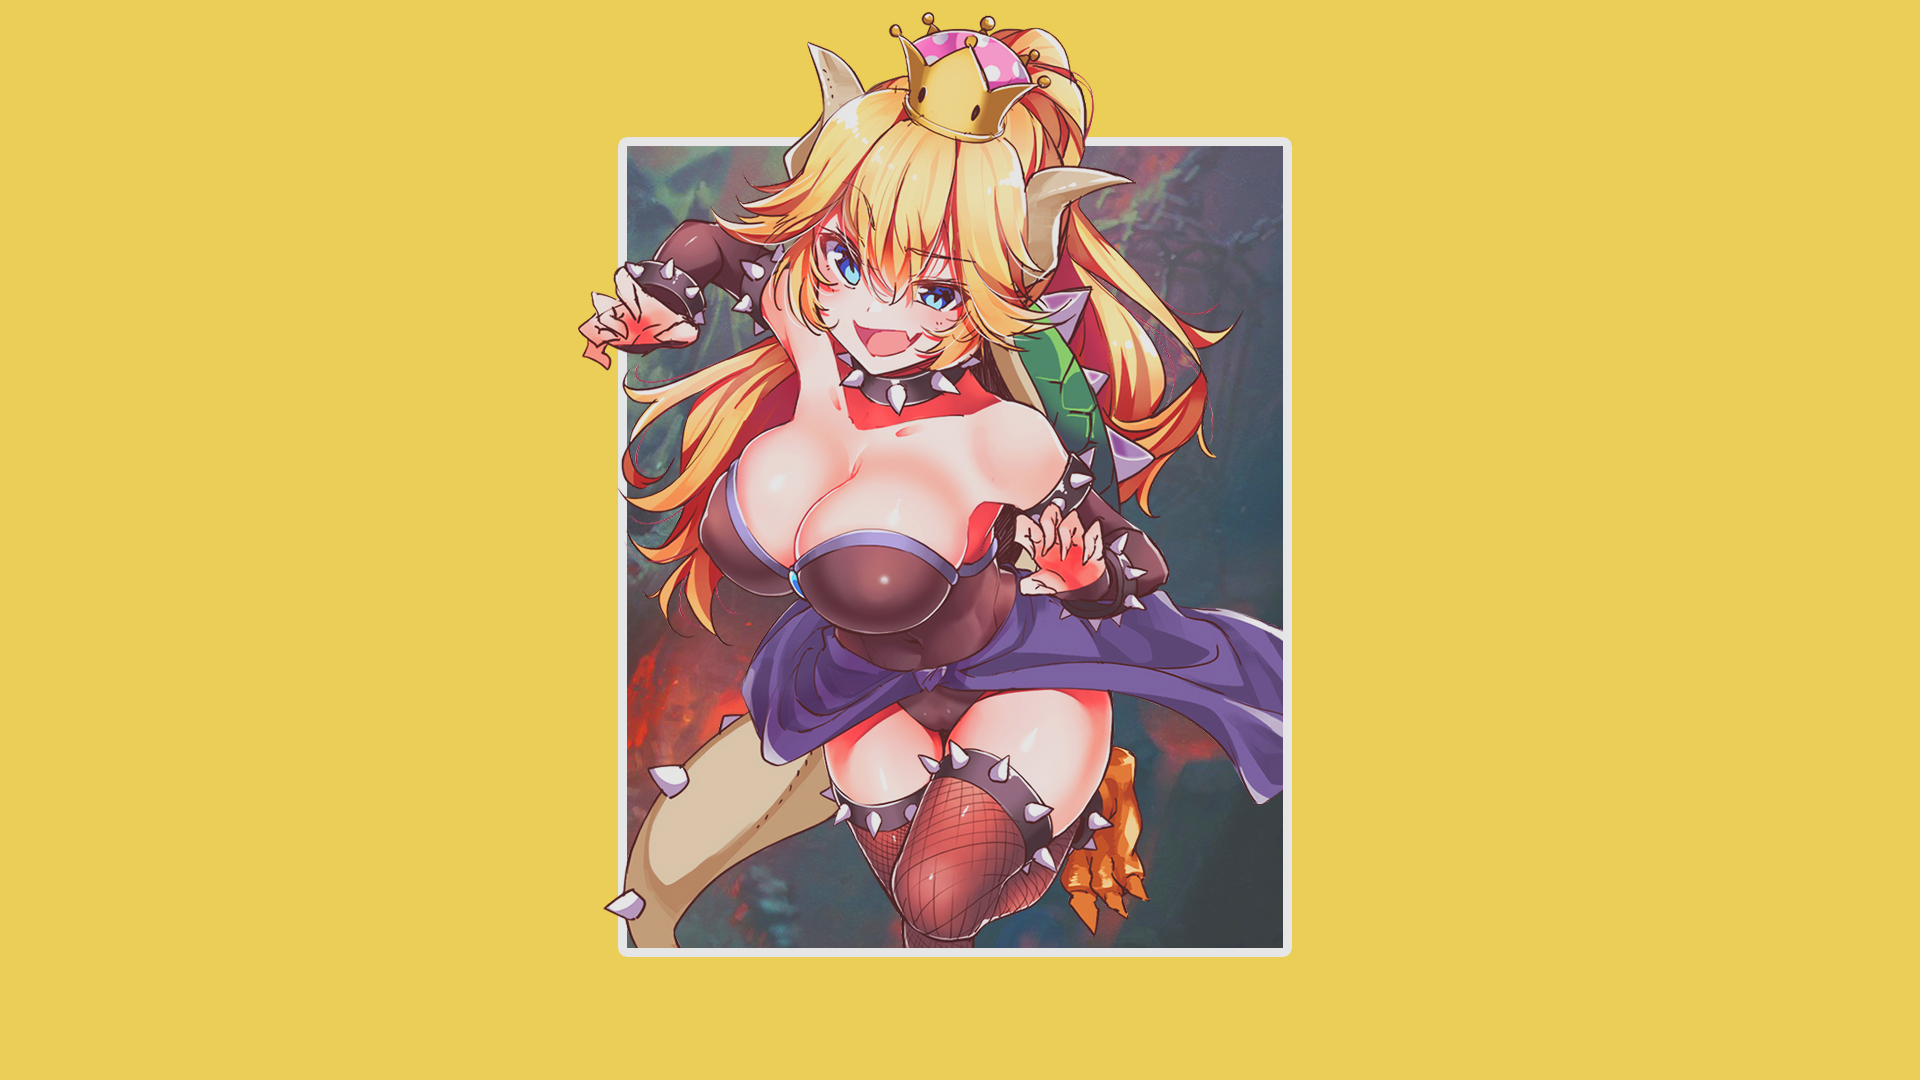 Anime 1920x1080 anime anime girls simple background Bowsette big boobs picture-in-picture